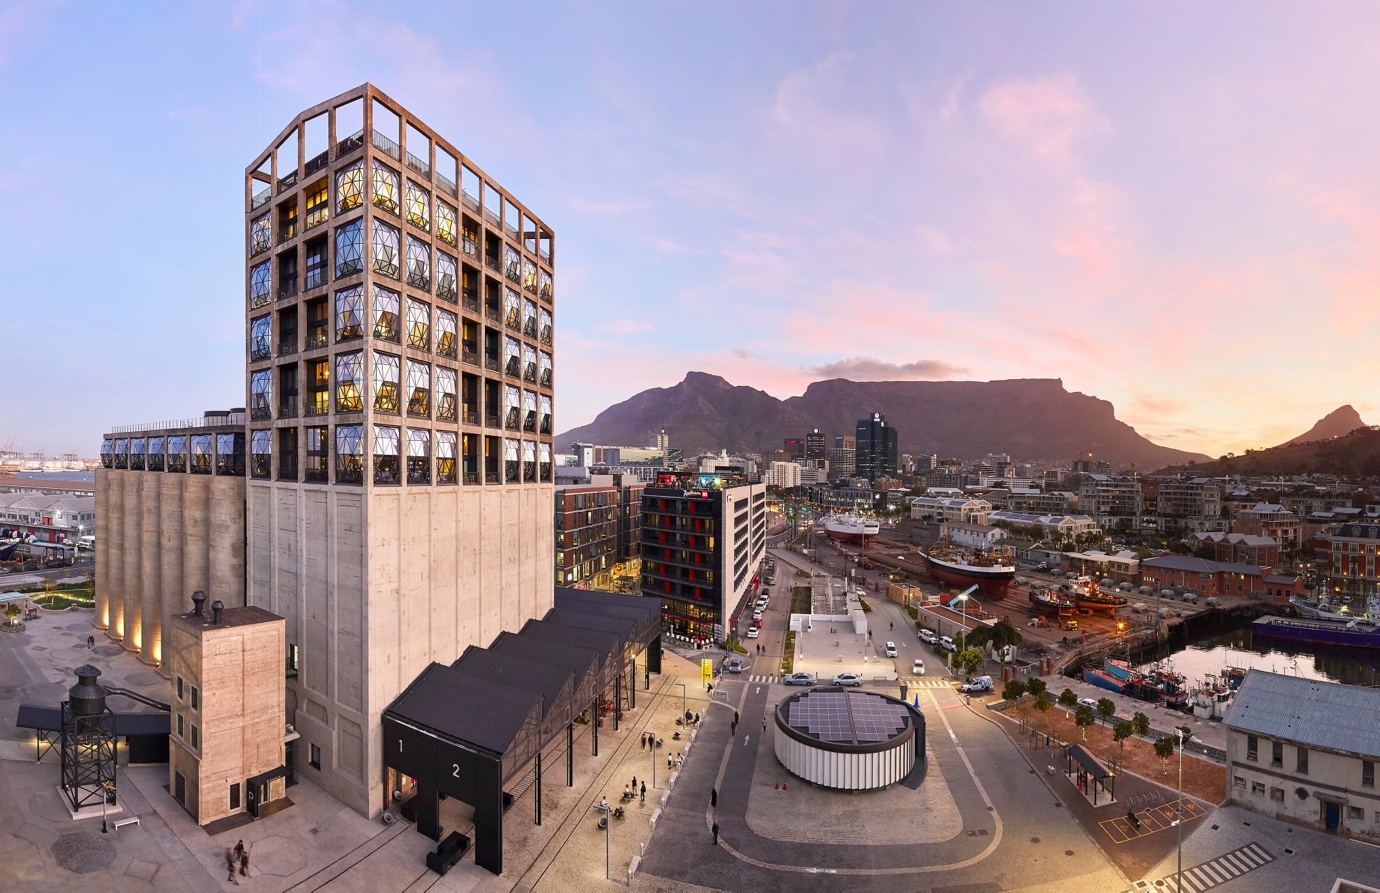 At Cape Town’s Award-Winning Temple to the Arts and Fashion, THE ZEITZ MUSEUM OF CONTEMPORARY ART AFRICA (MOCAA), the Sky is Most Definitely Not the Limit.